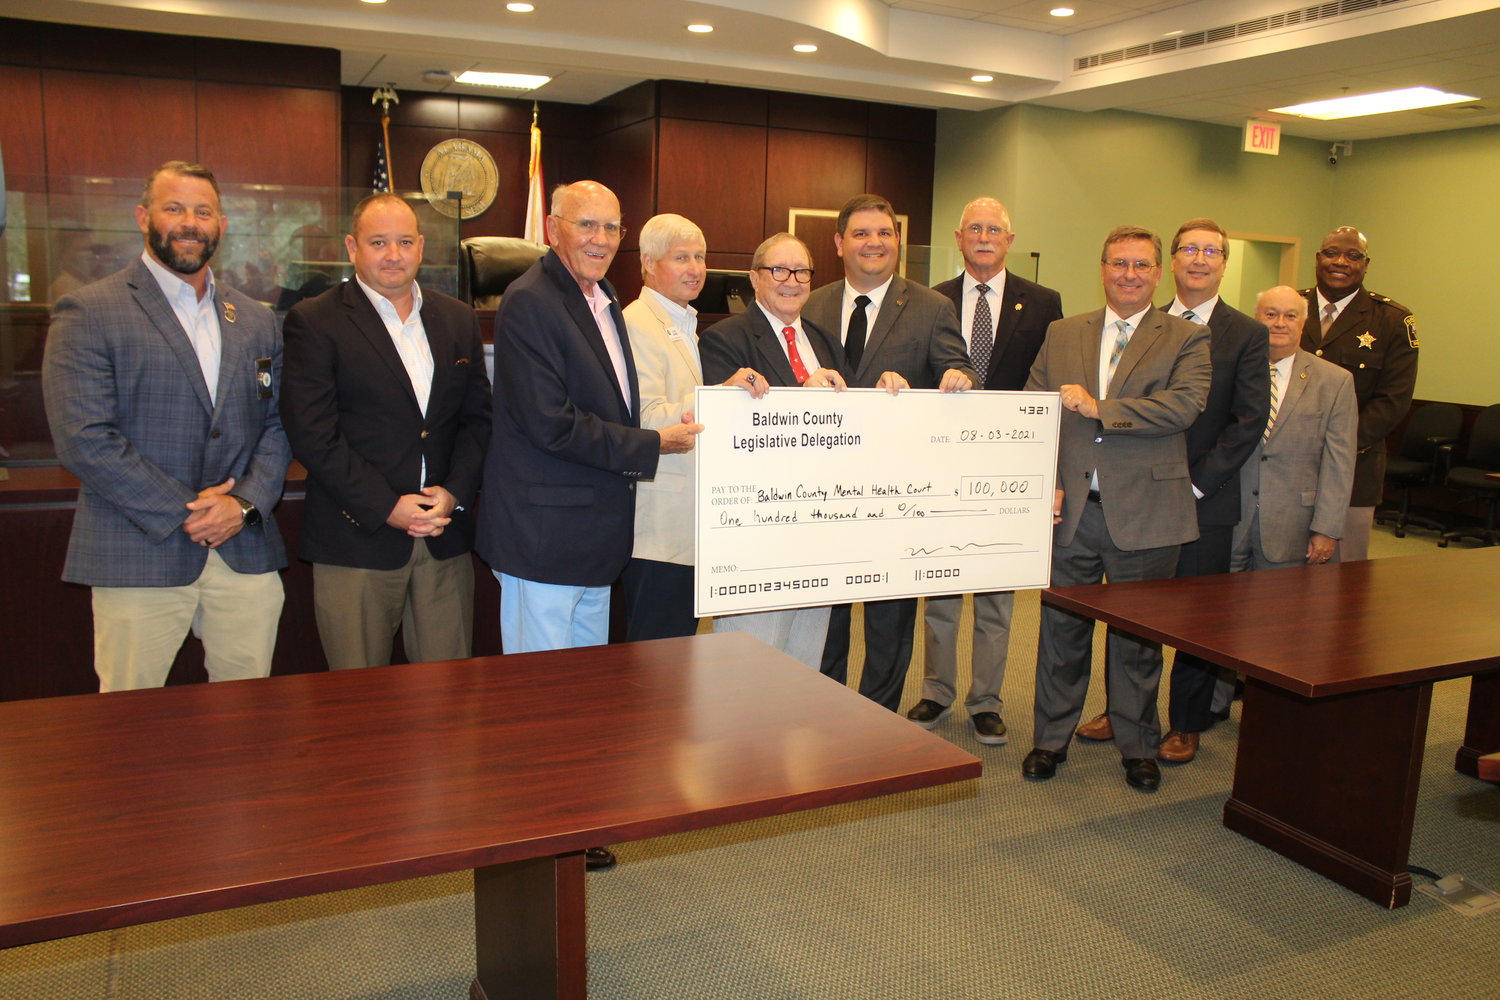 Members of the Baldwin County Legislative Delegation present a check for $100,000 on Tuesday, Aug. 3 to establish a Mental Health Court in Baldwin County. Pictured are, from left, Baldwin County Commissioner Jeb Ball, Sen. Chris Elliott, Rep. Harry Shiver, Rep. Alan Baker, Rep. Steve McMillan, Rep. Matt Simpson, District Attorney Bob Wilters, Judge Scott Taylor, Judge Jody Bishop, Judge Harry D’Olive and Maj. Jimmy Milton with the Baldwin County Sheriff’s Office.